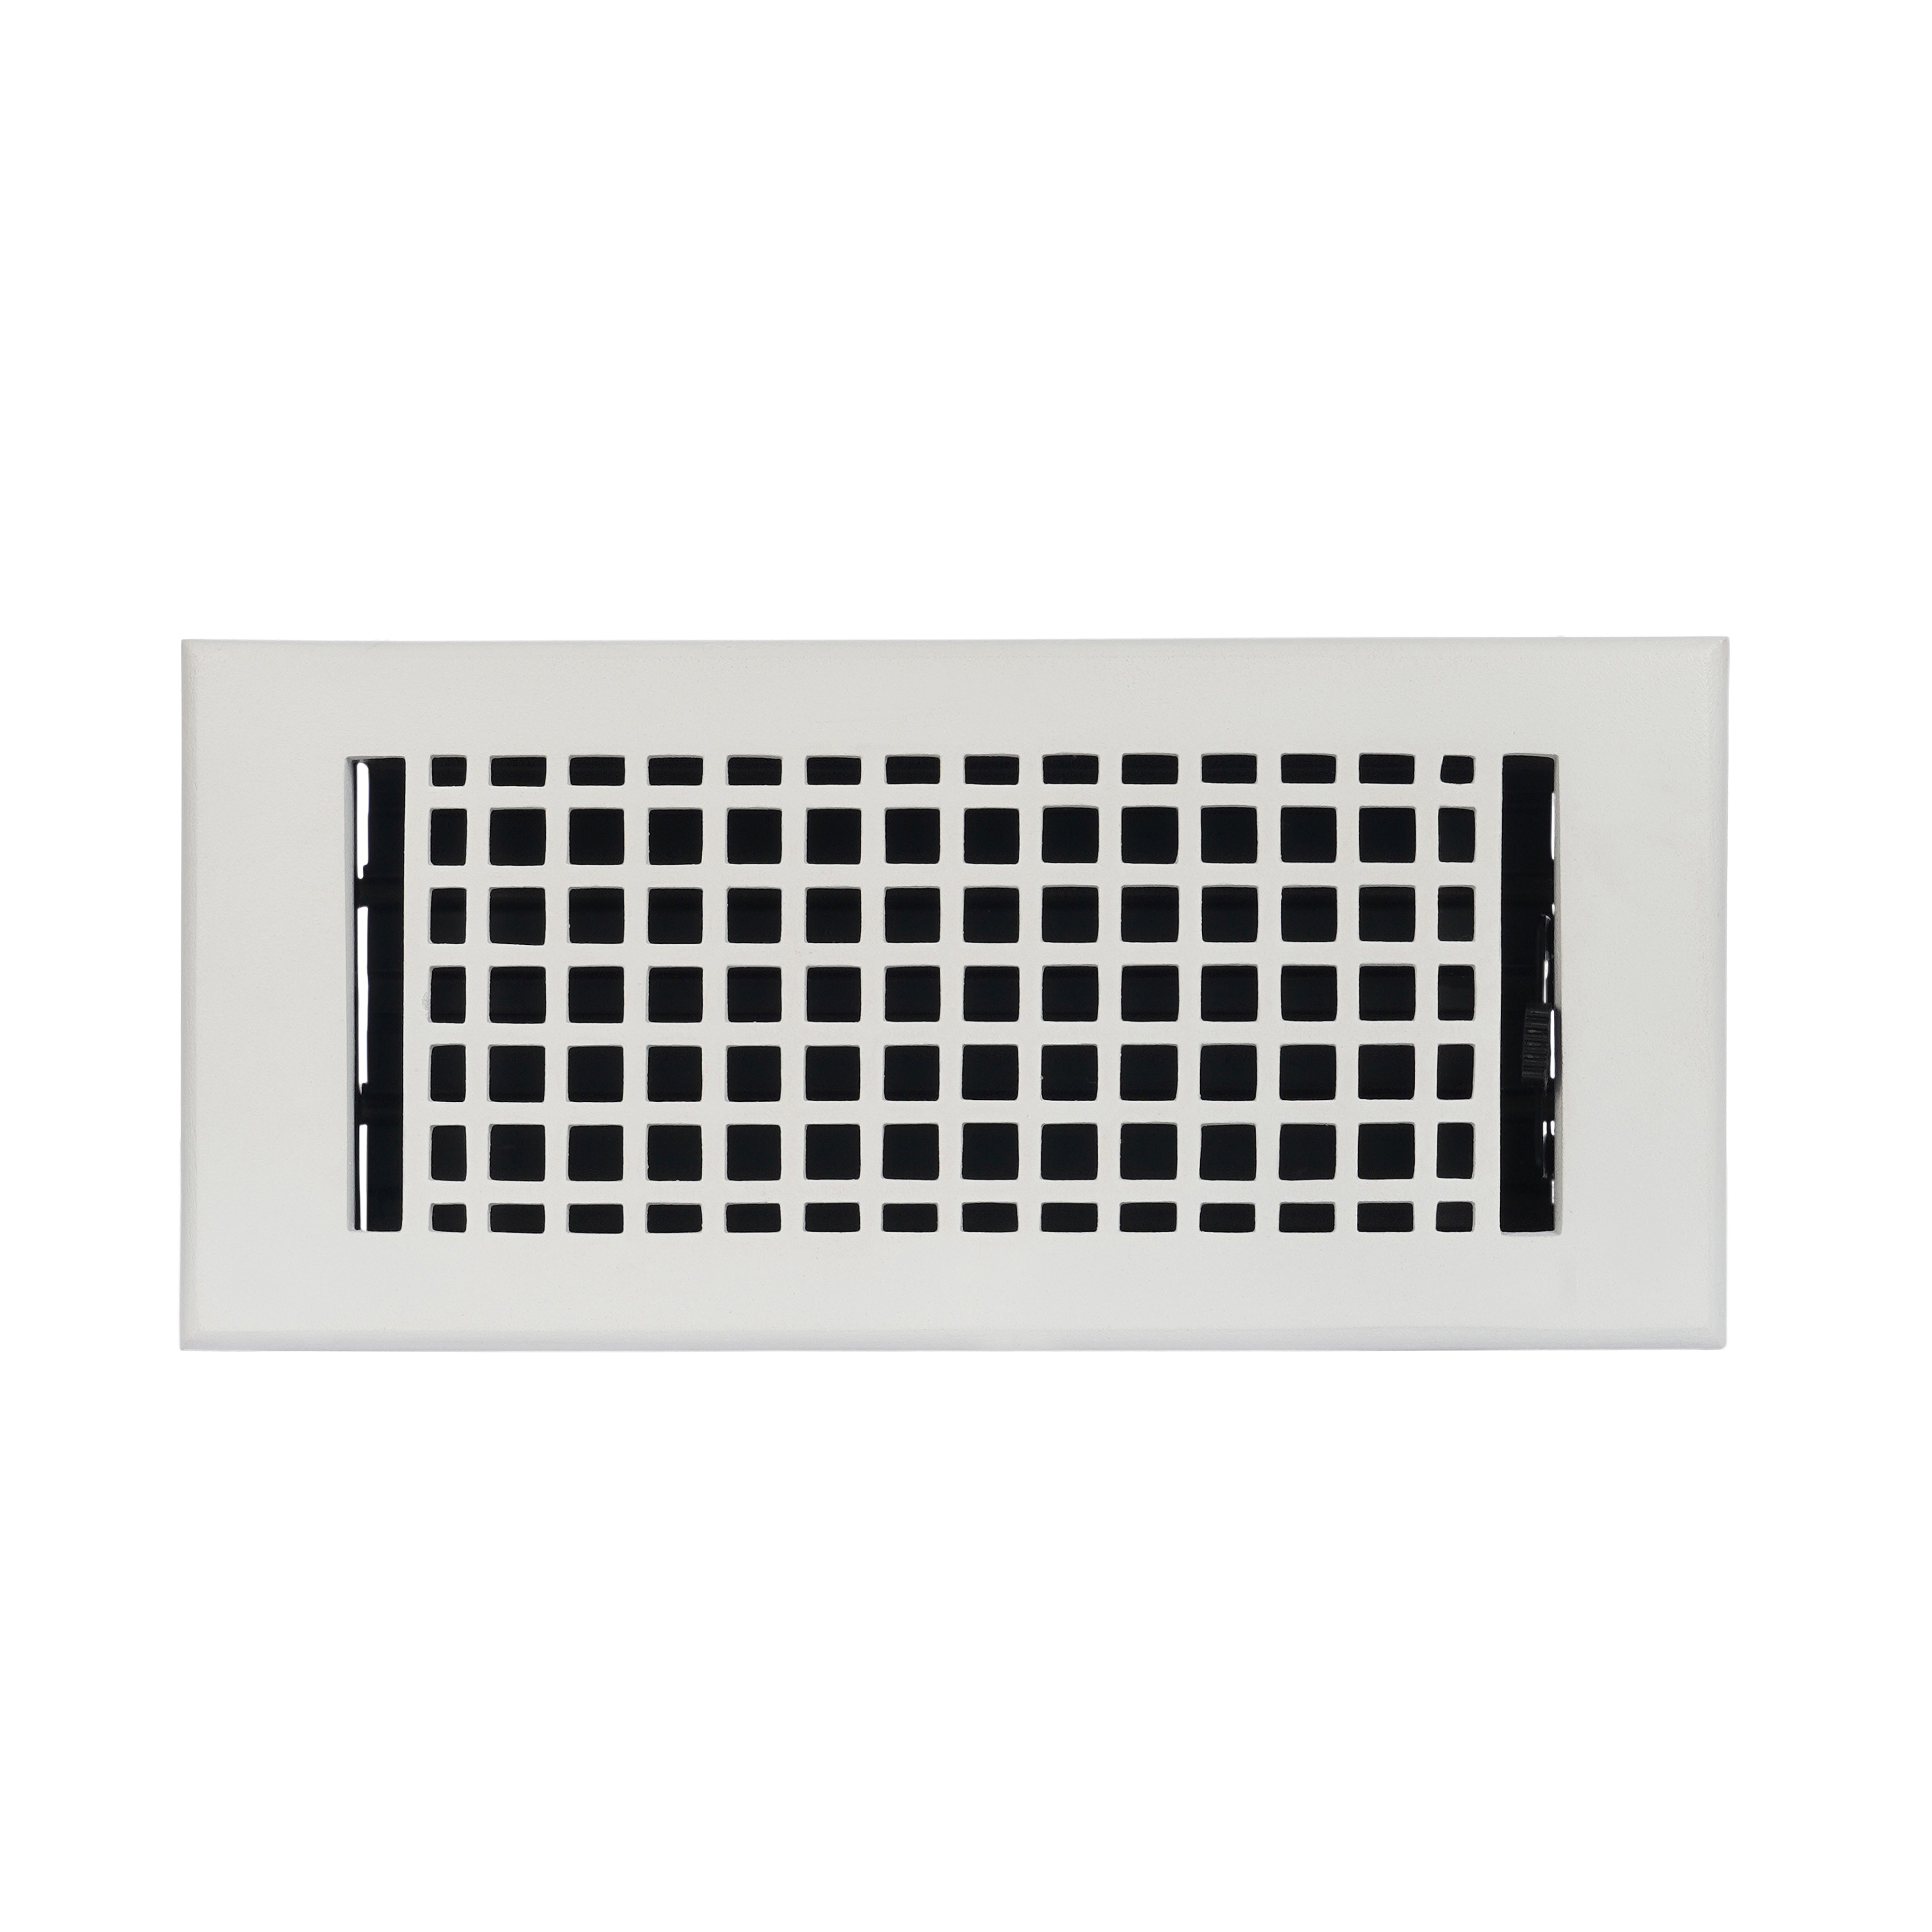 Mosaic 4"x10" Solid Cast Aluminum Air Supply louvered Vent |Powder Coated